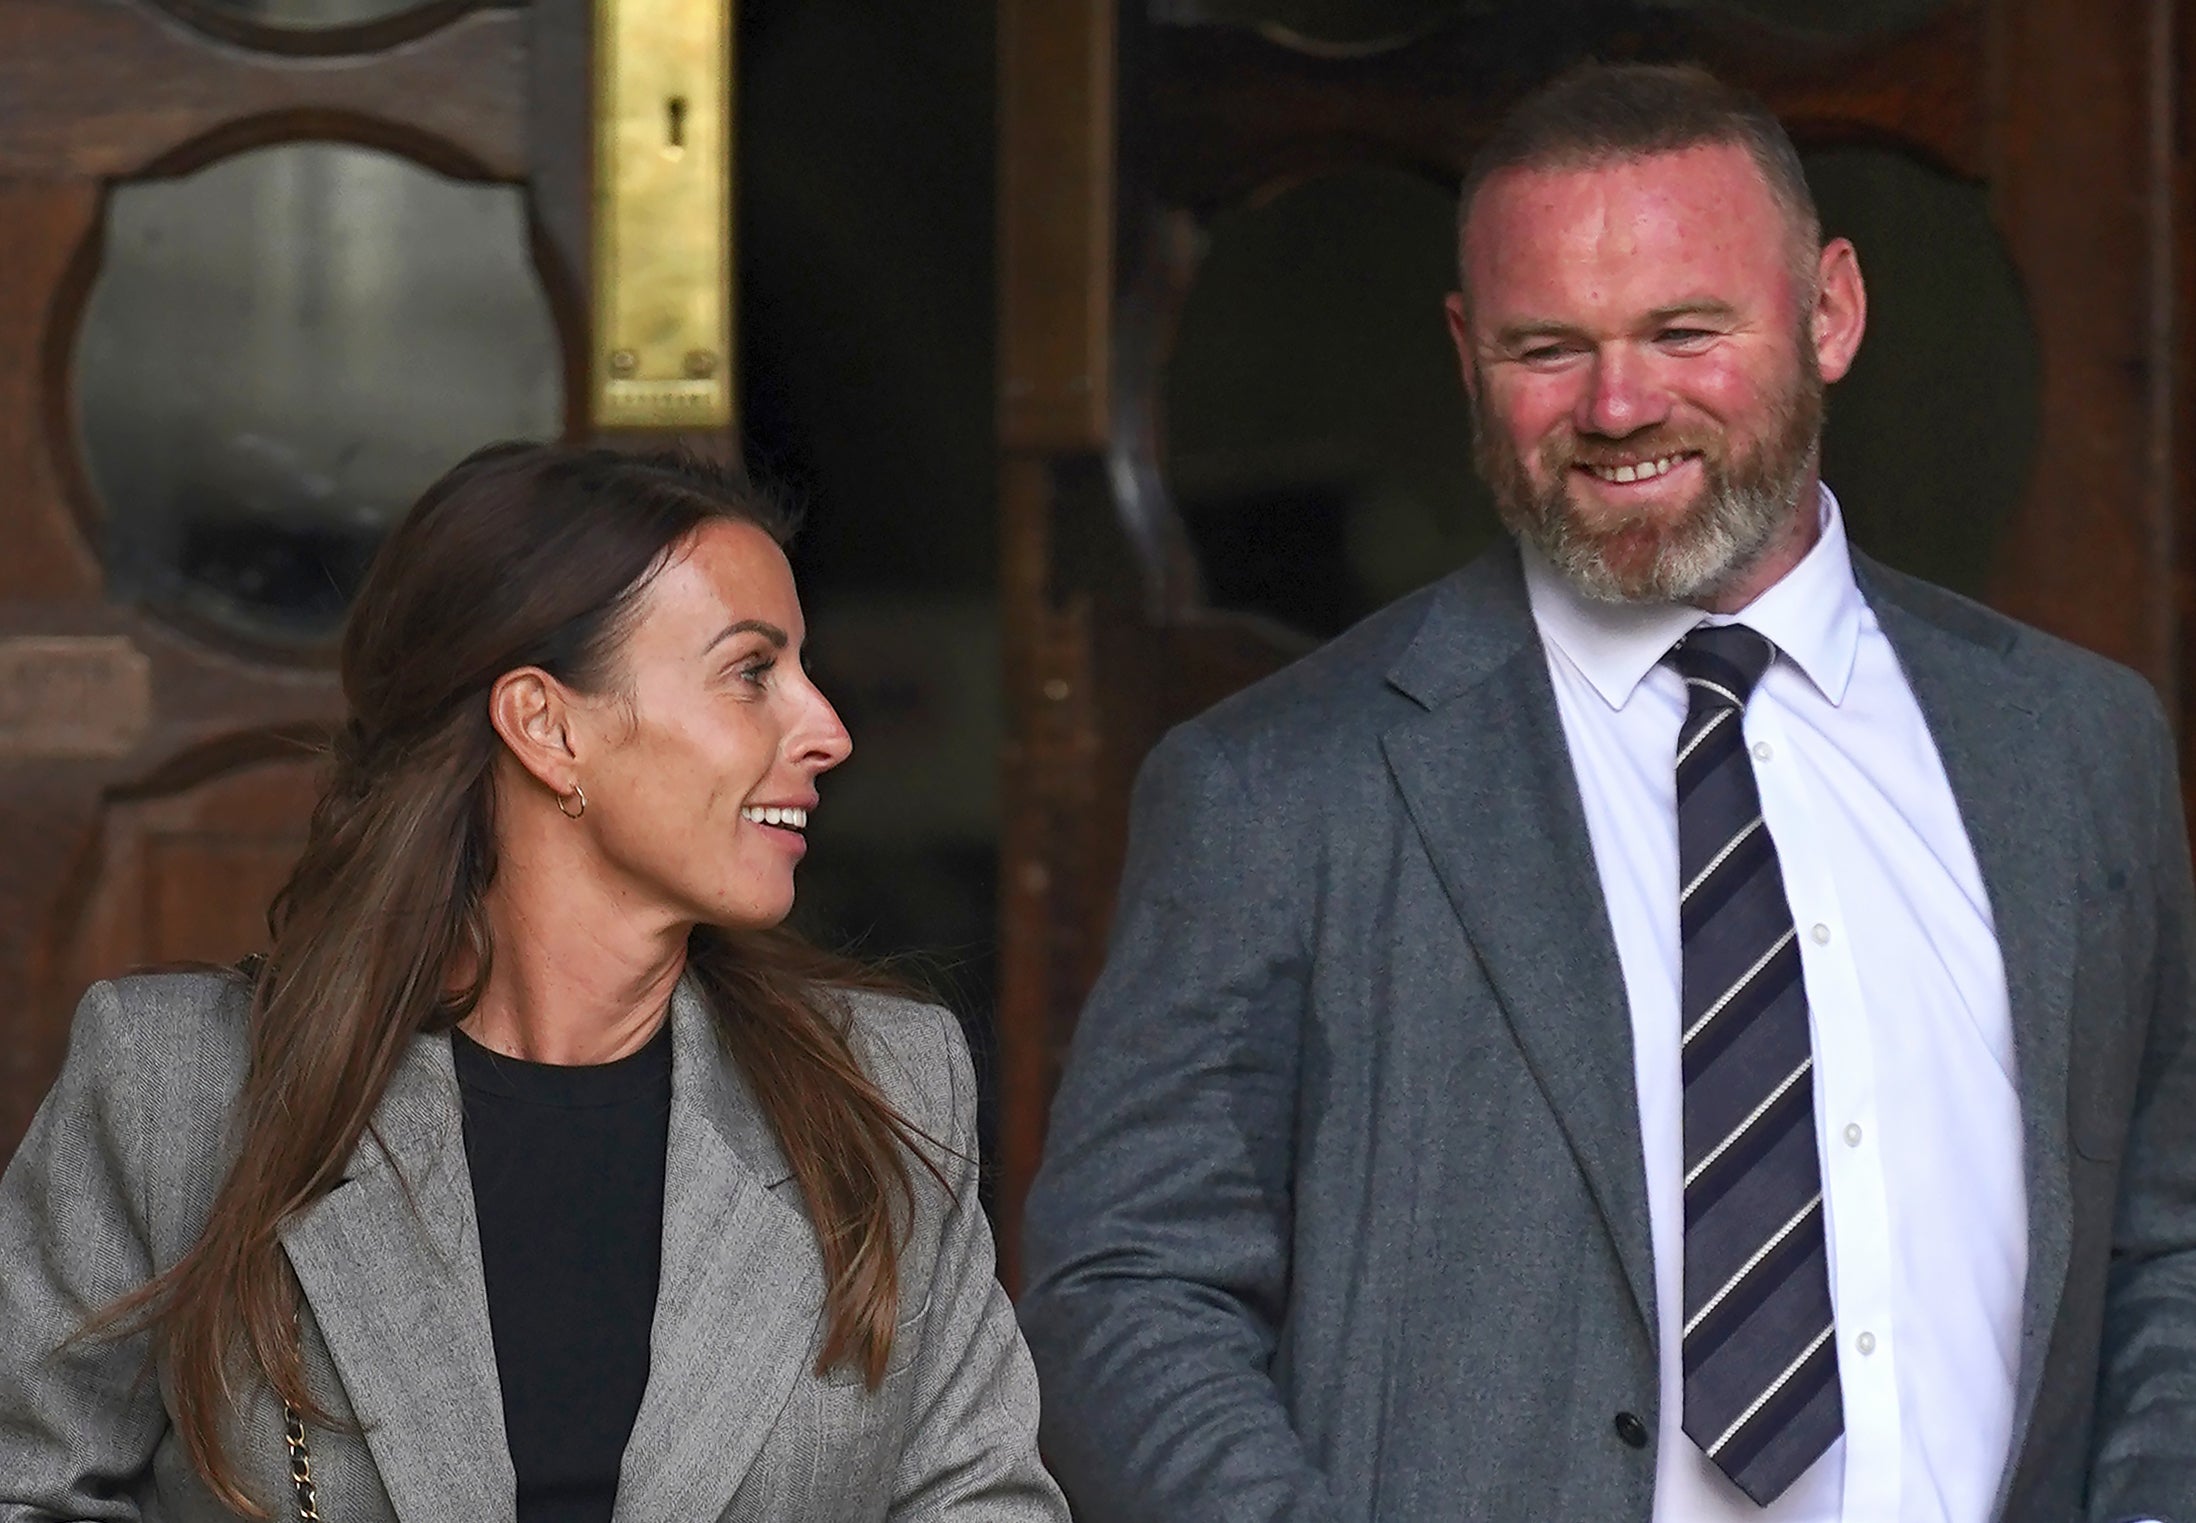 Coleen Rooney with husband Wayne during the trial (Yui Mok/PA)